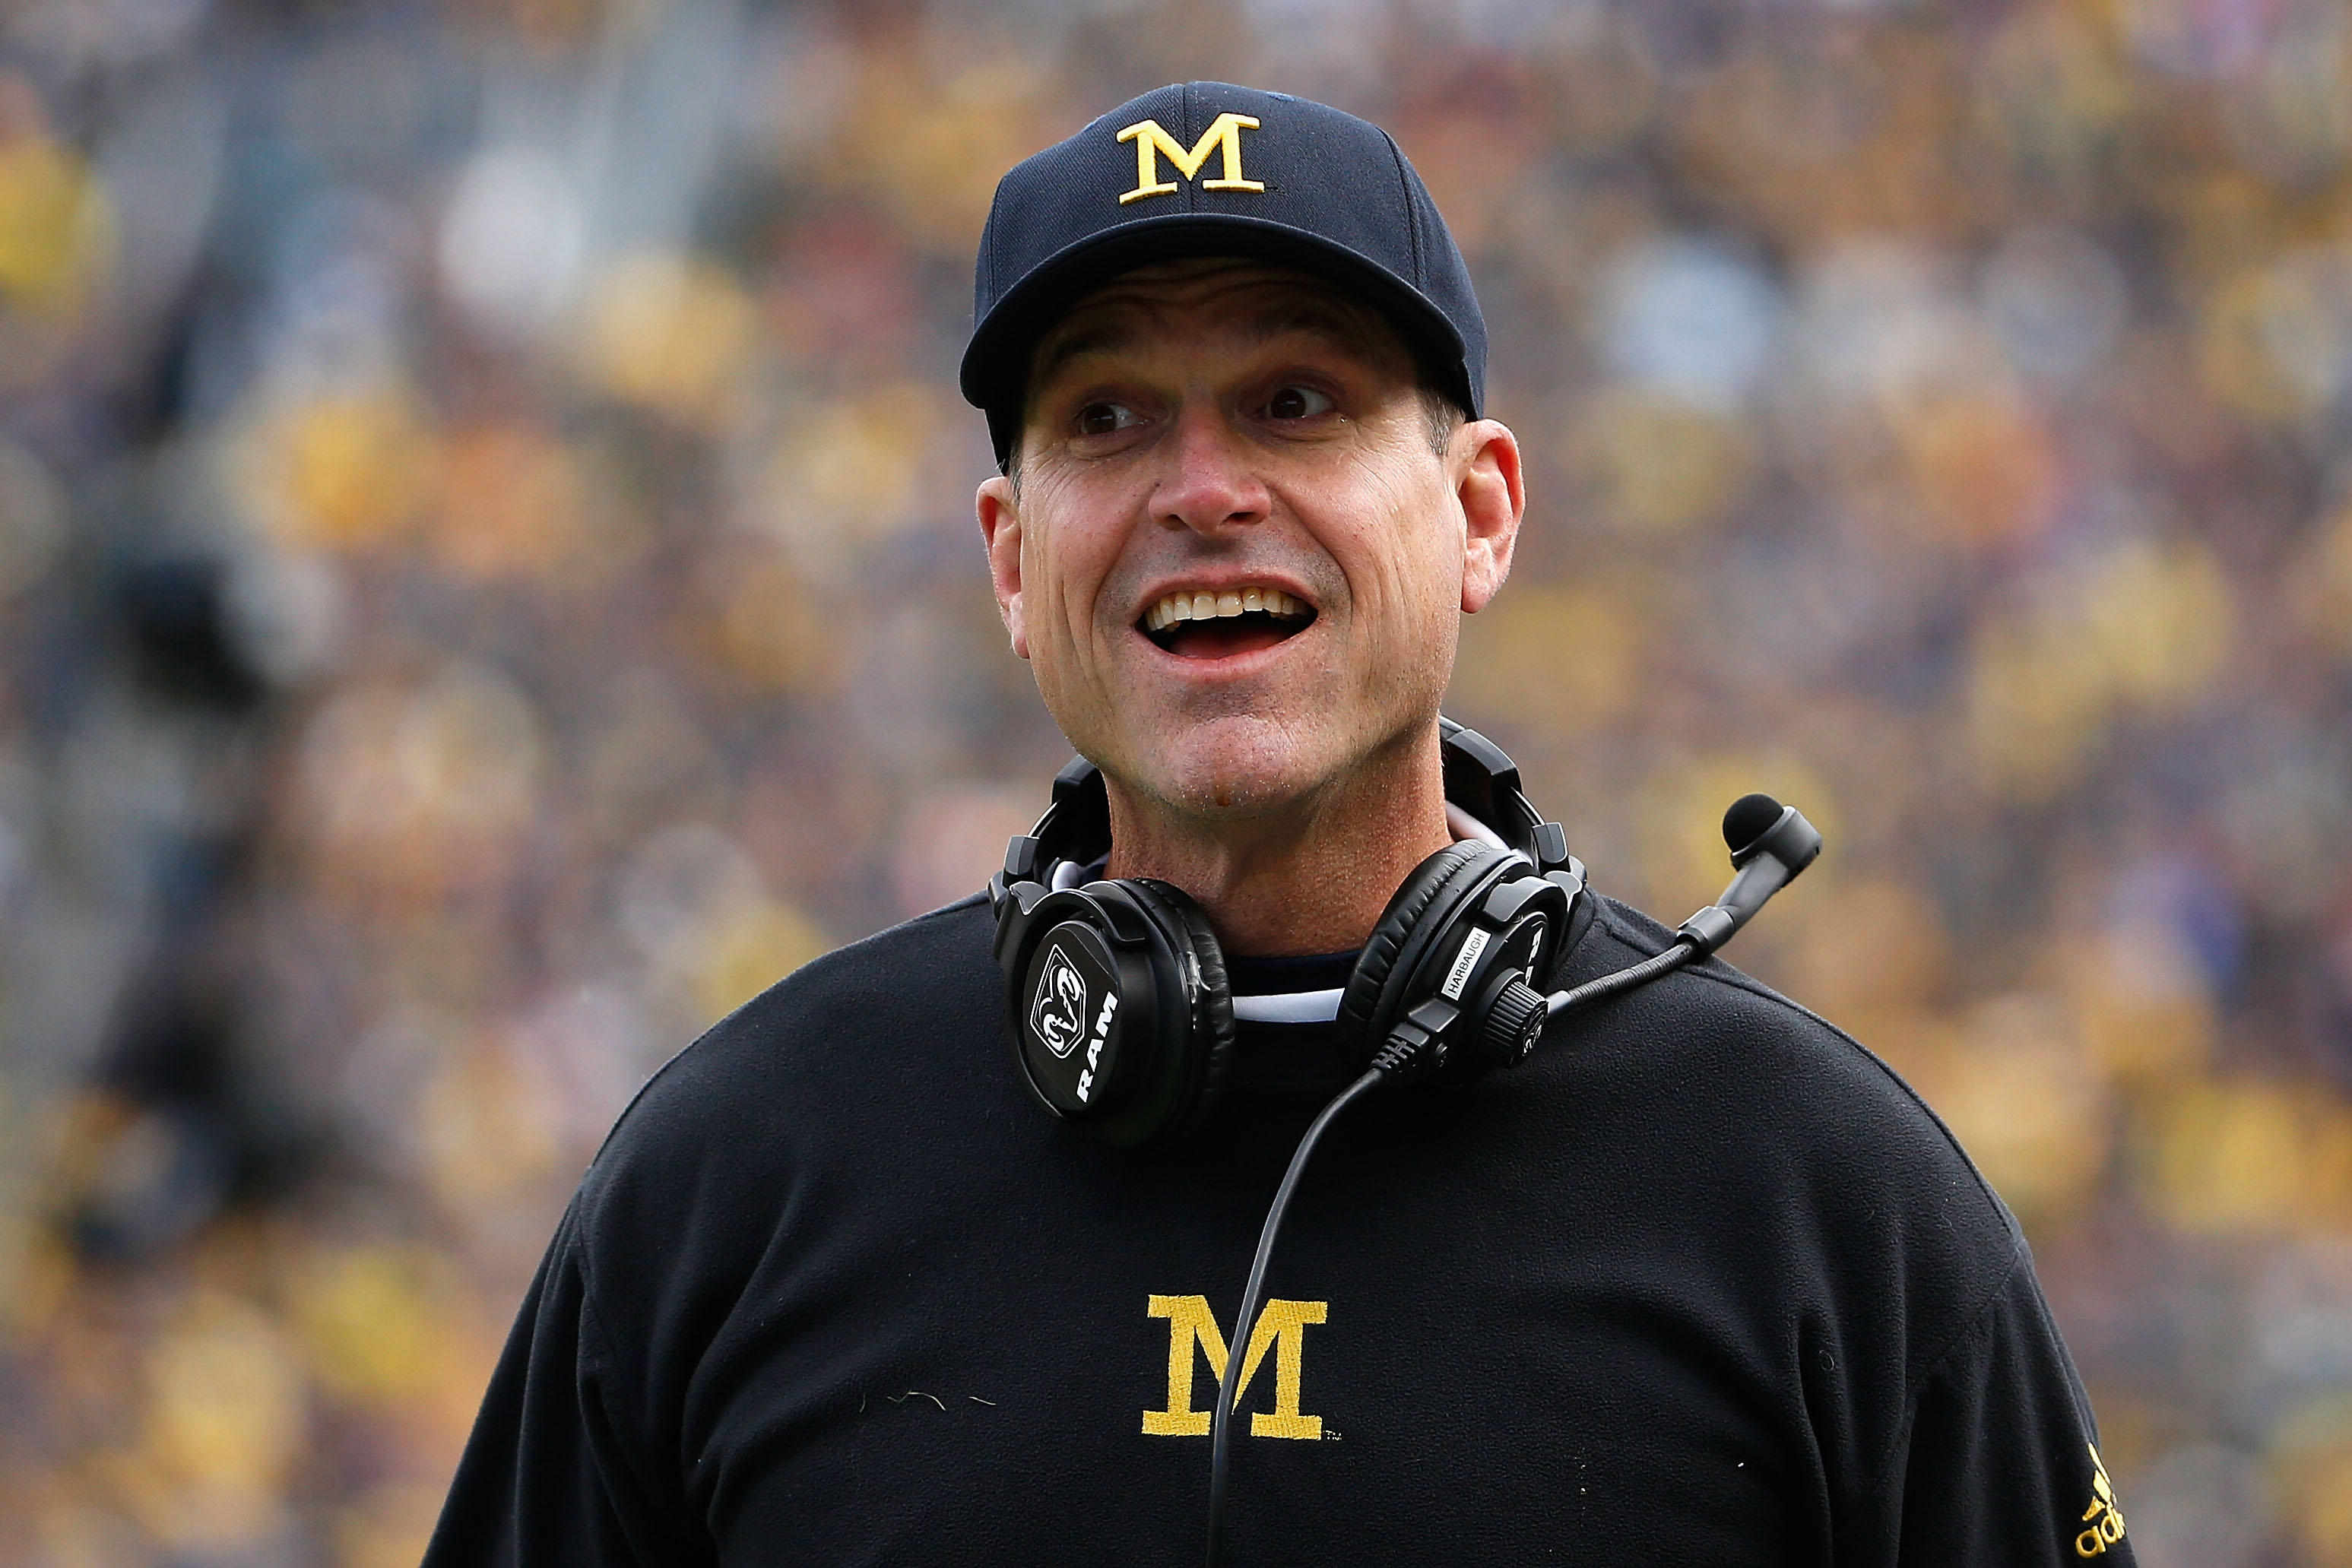 Michigan Coach Jim Harbaugh Joins The Chain Crew While Recruiting